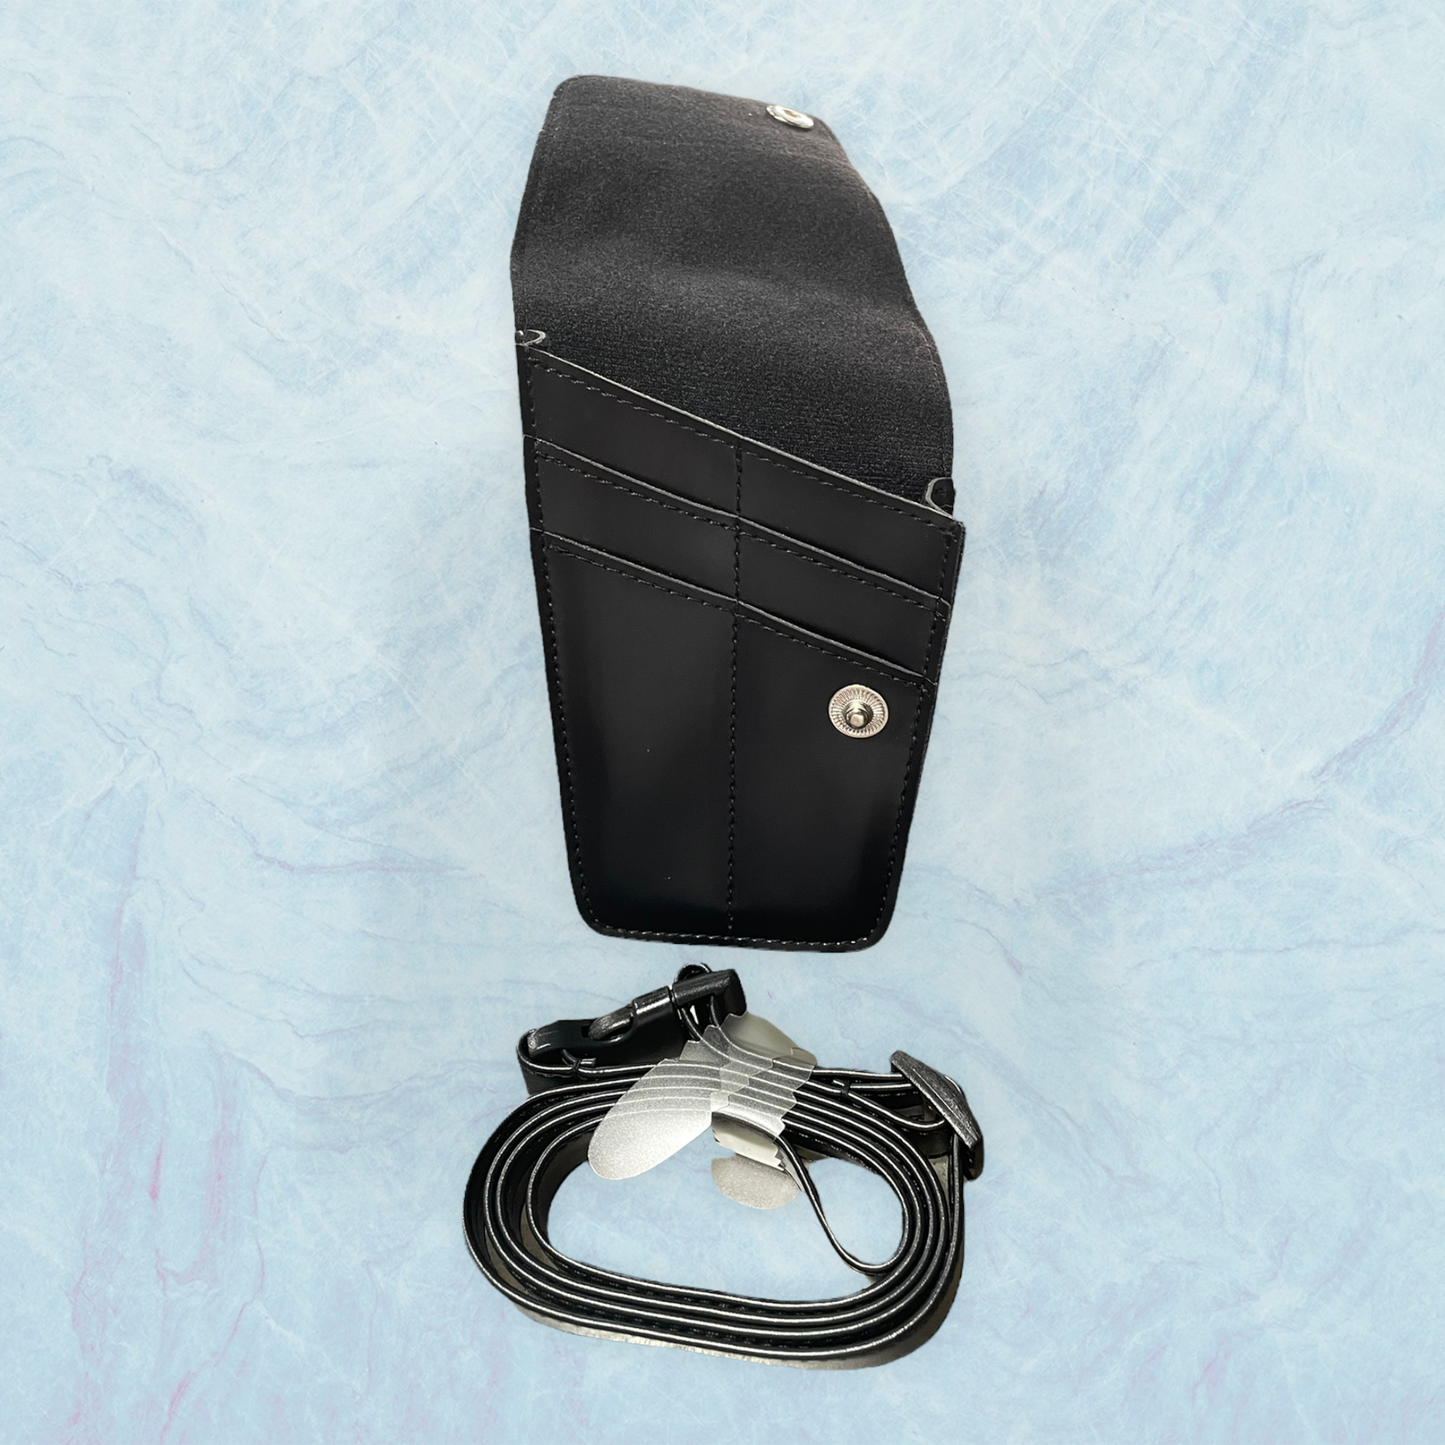 Fromm Shear Case or Holster